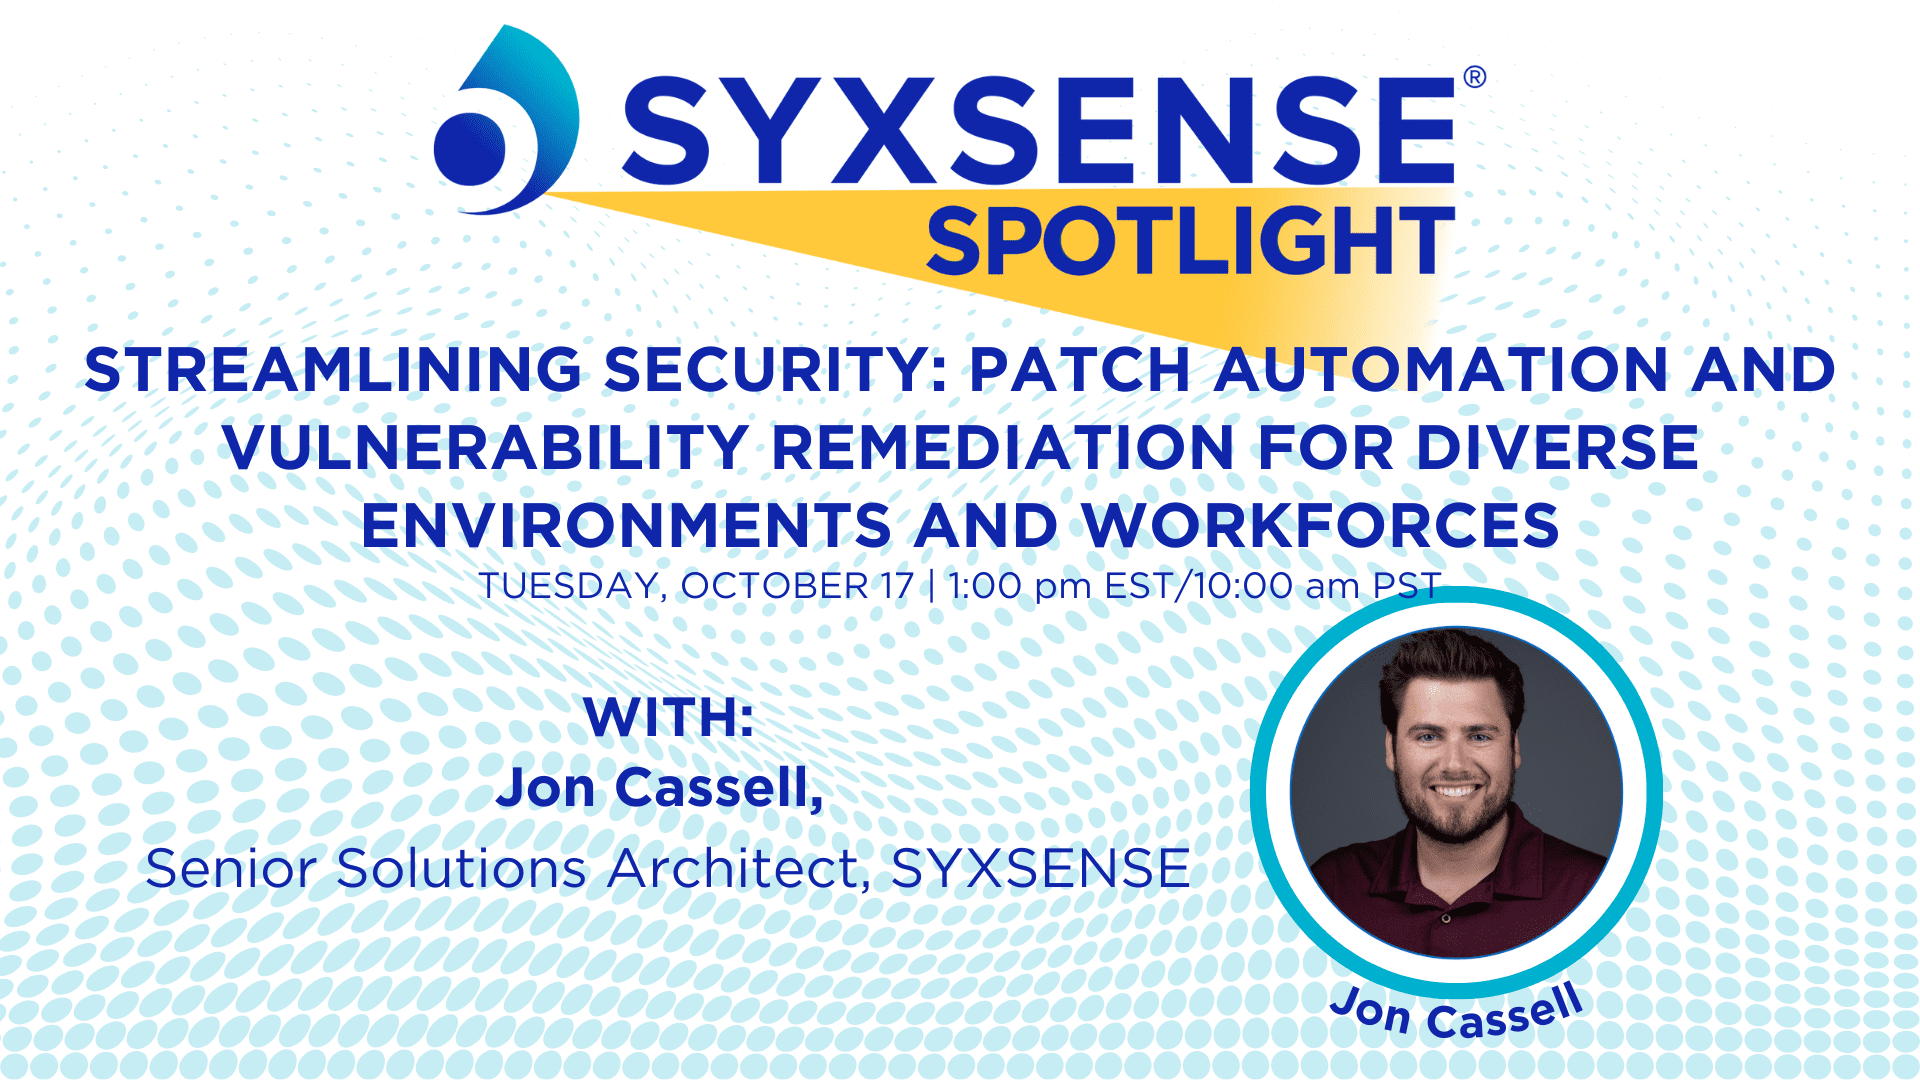 Spotlight Webinar | Streamlining Security: Patch Automation and Vulnerability Remediation for Diverse Environments and Workforces